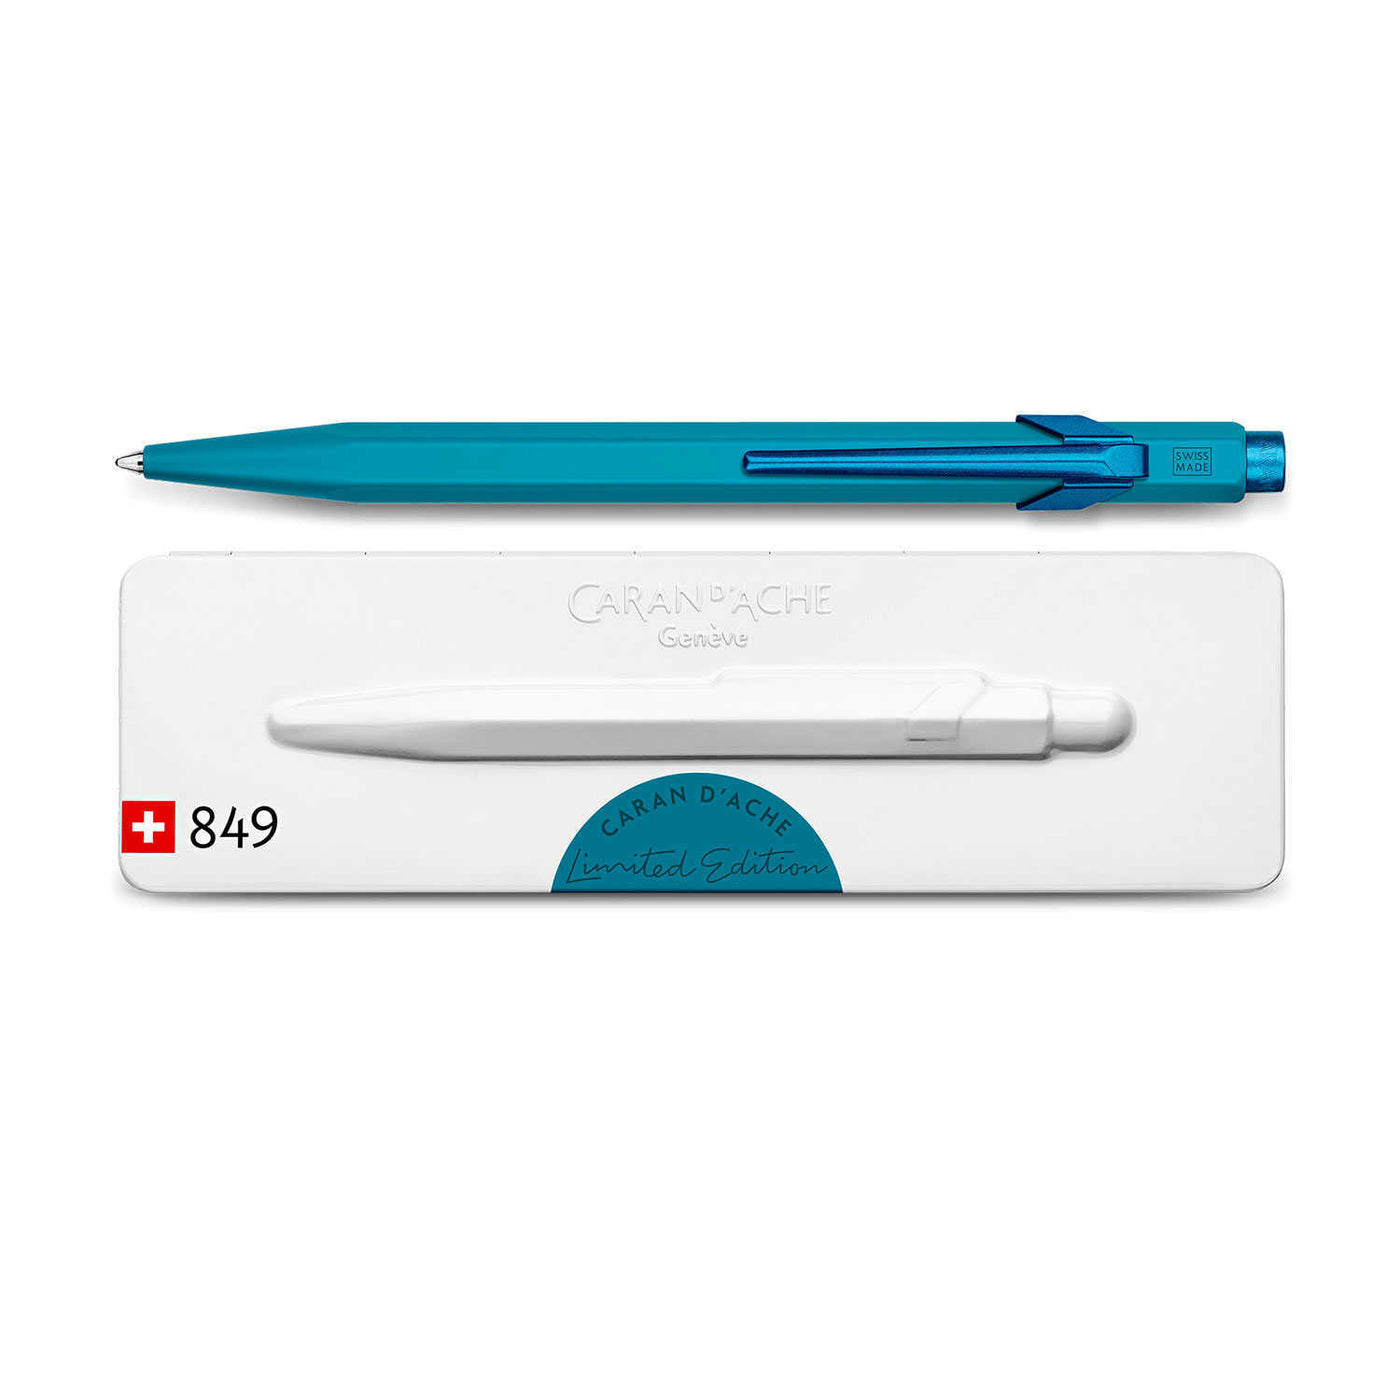 Caran d'Ache 849 Claim Your Style Ball Pen - Ice Blue (Limited Edition) 2